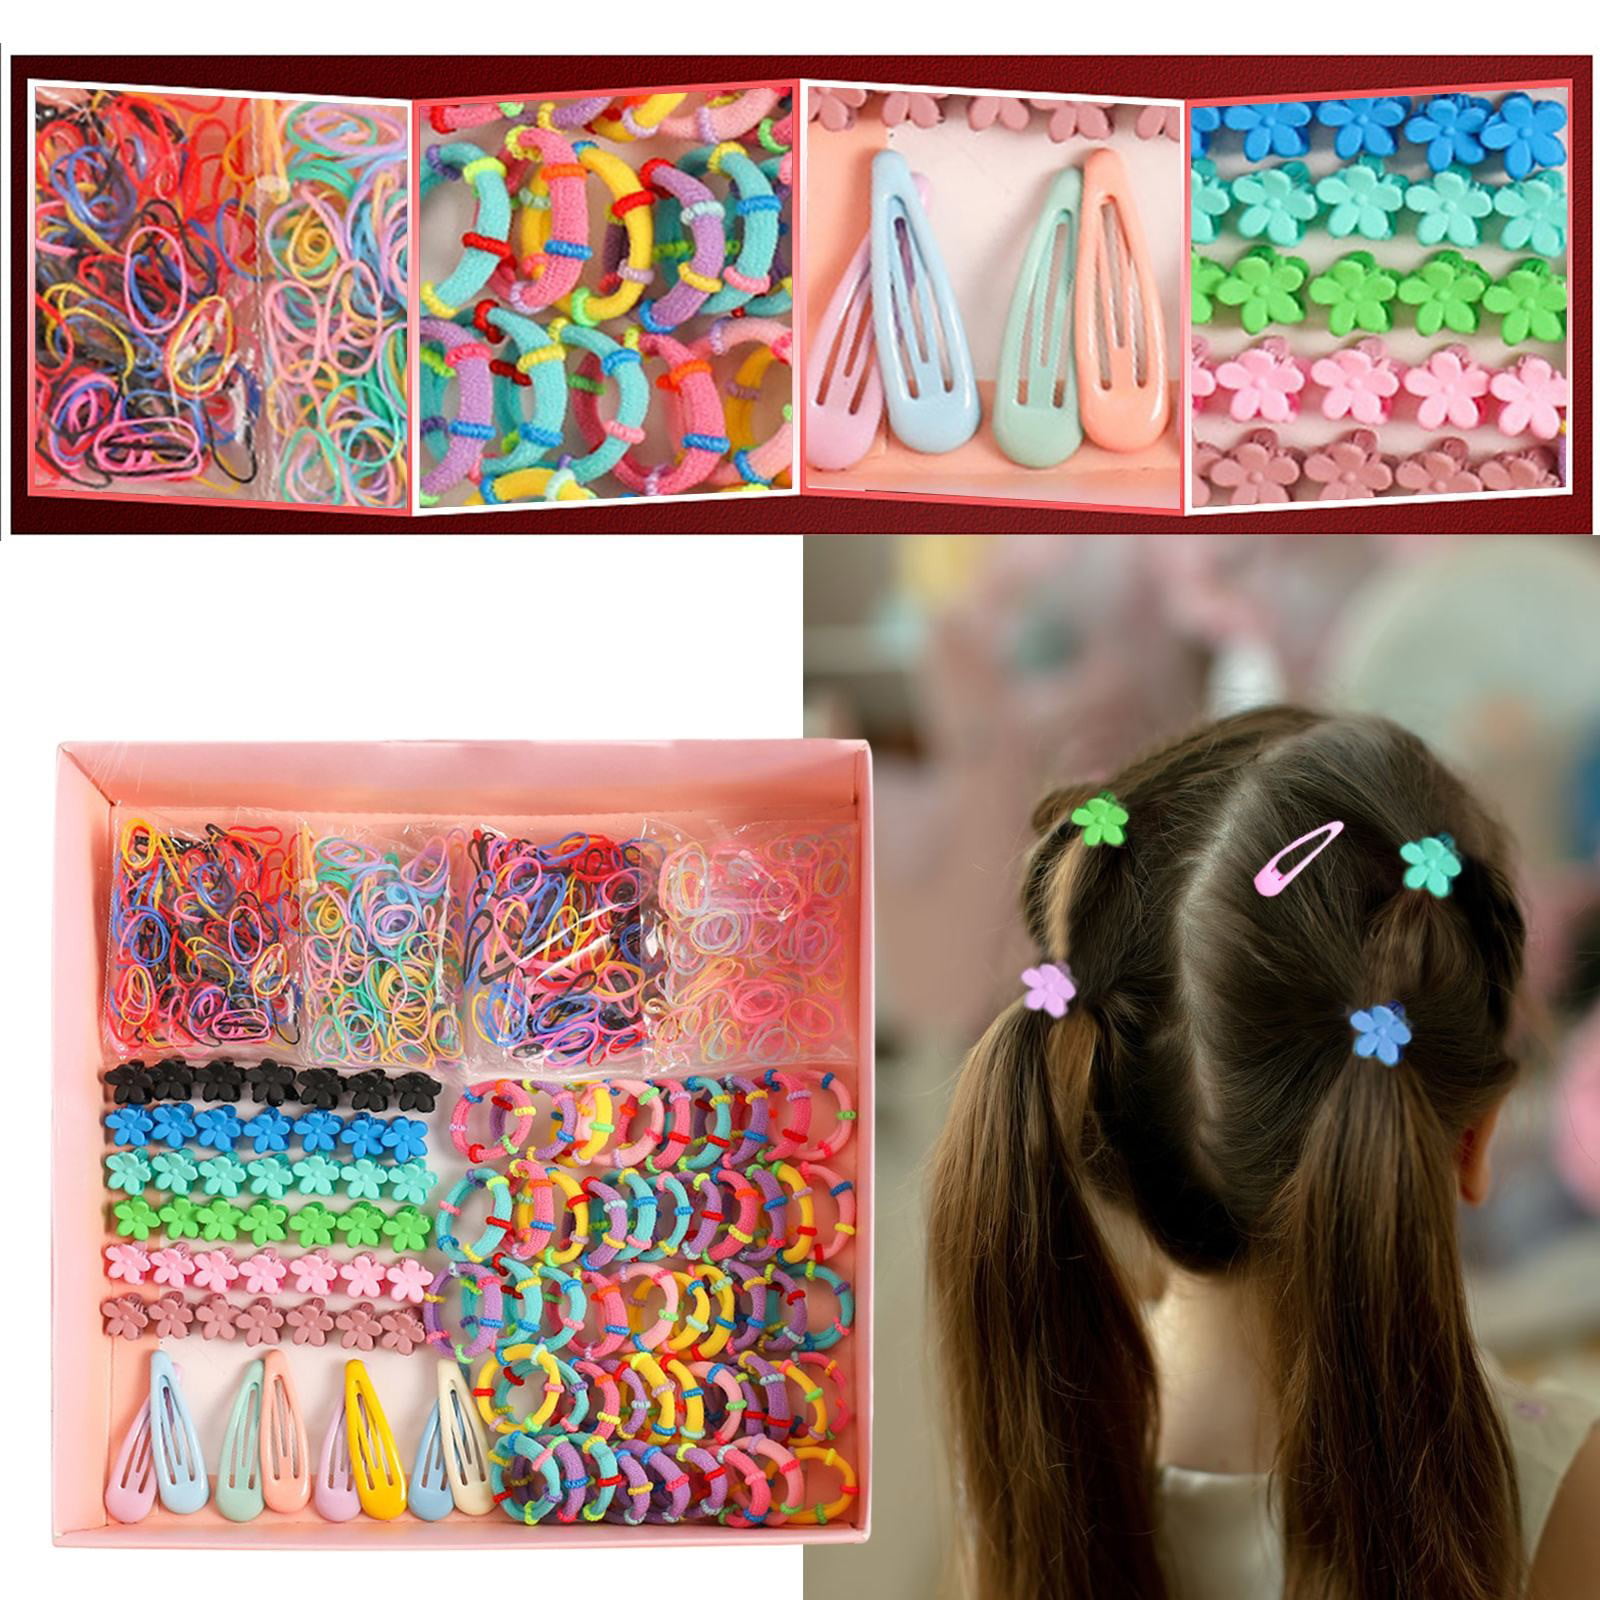 1500pcs/Set 2 Sets Colorful Mini Rubber Bands, 4 Pcs Rubber Band Cutter for  Hair, 5pcs Hair Styling Tools Set, 4pcs Professional Alligator Clips Hair  Accessories for Women and Girls